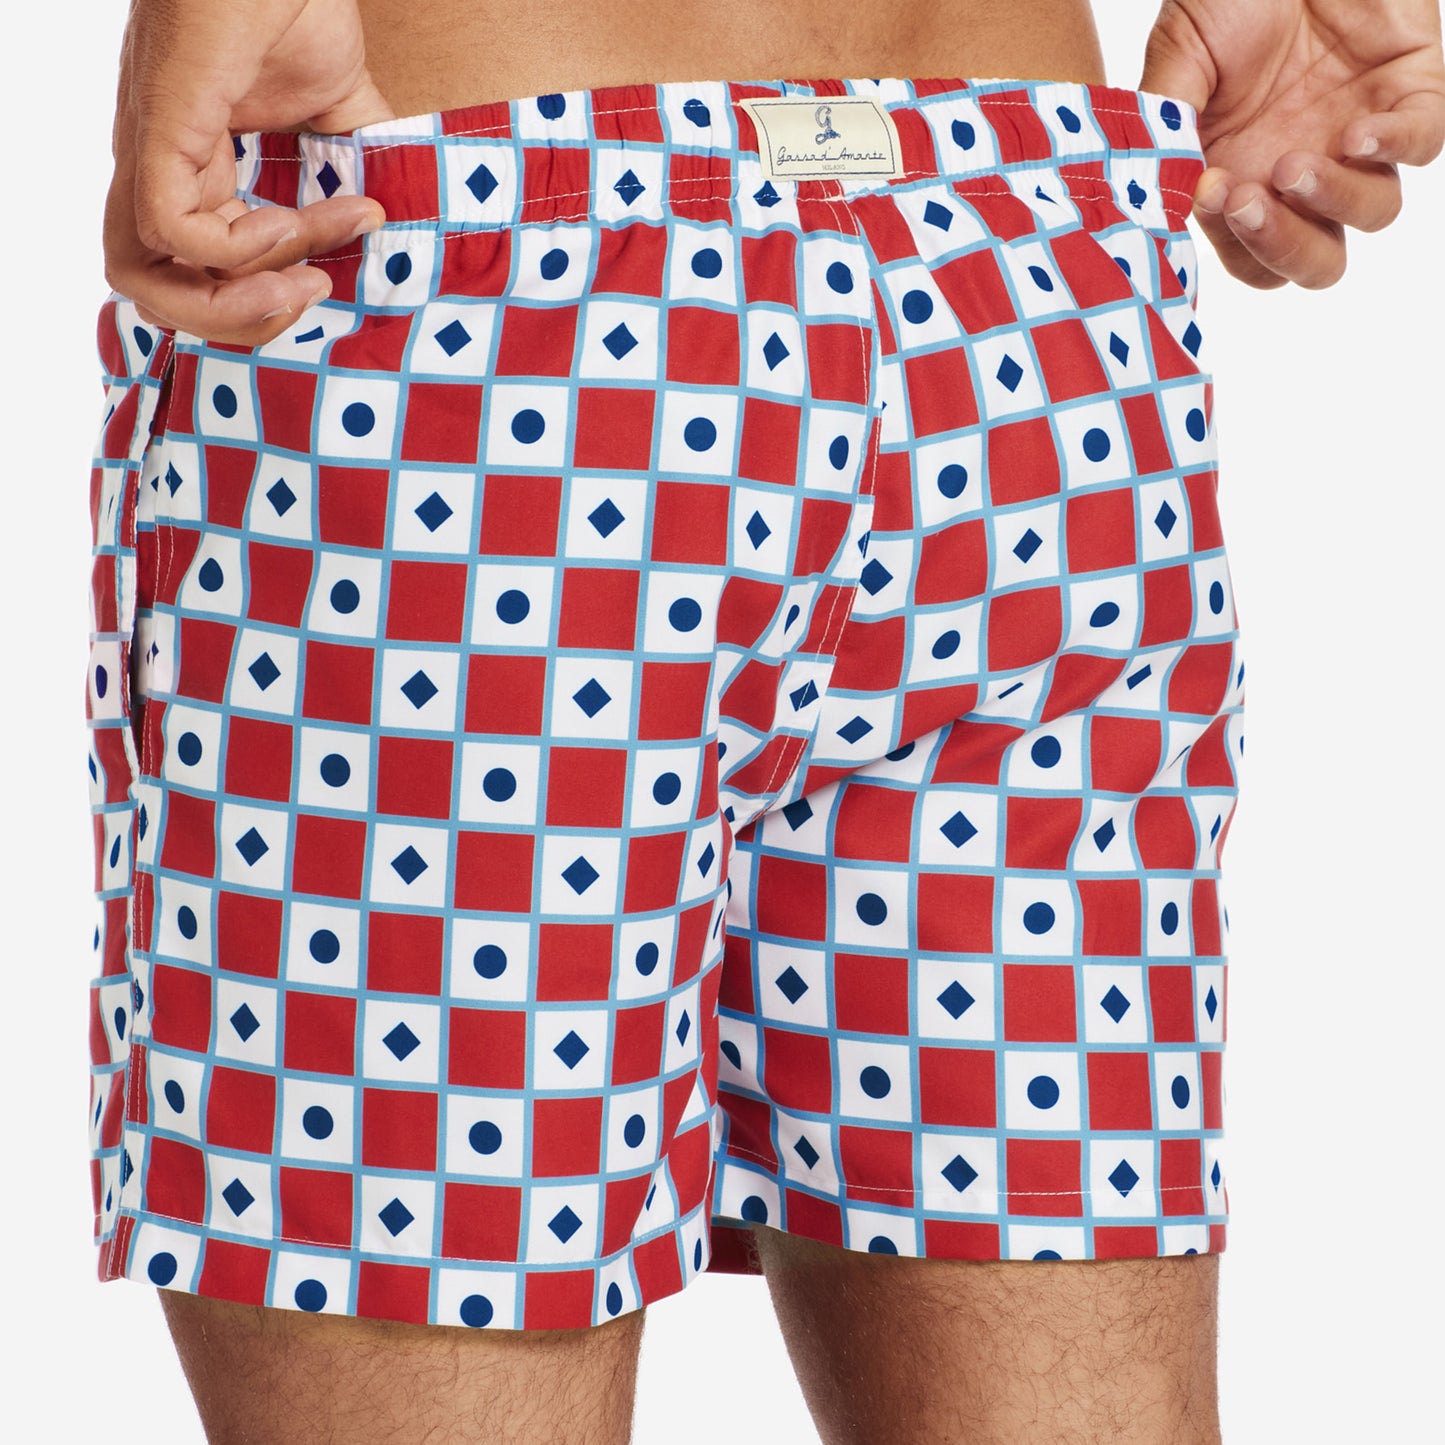 Sustainable Men's Swimsuit - Sciacca Red